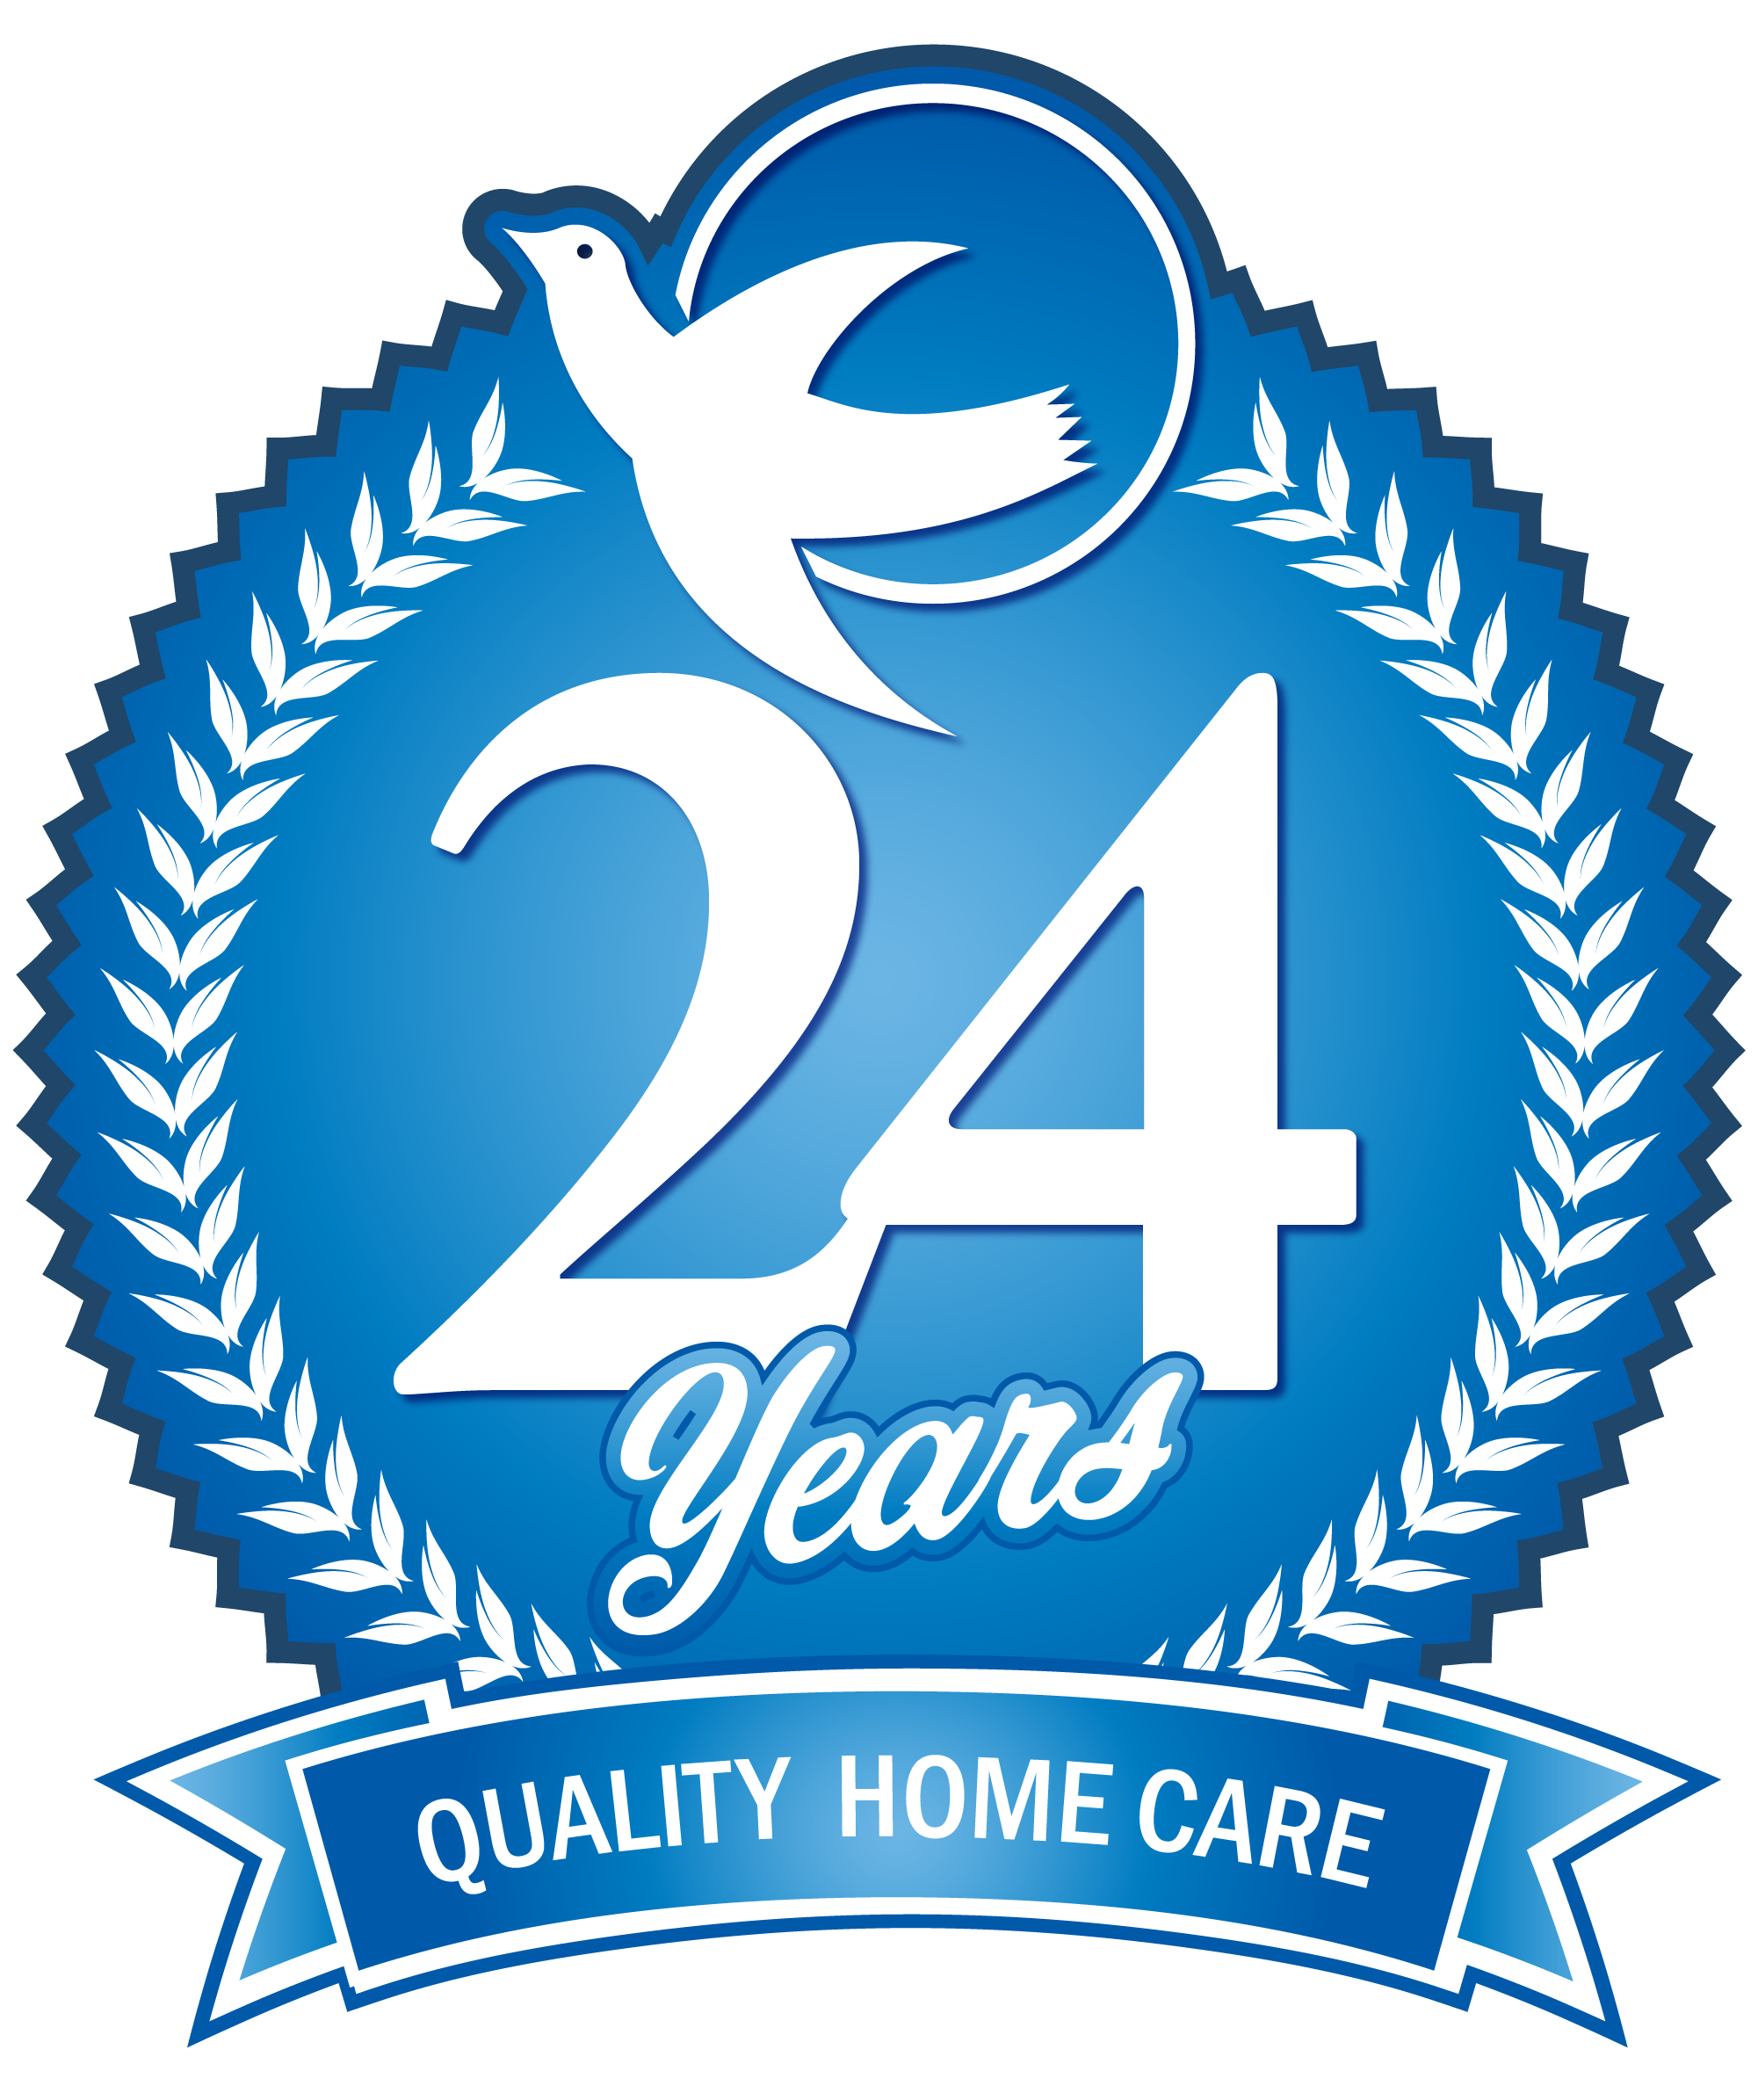 24 Years of Quality Home Care